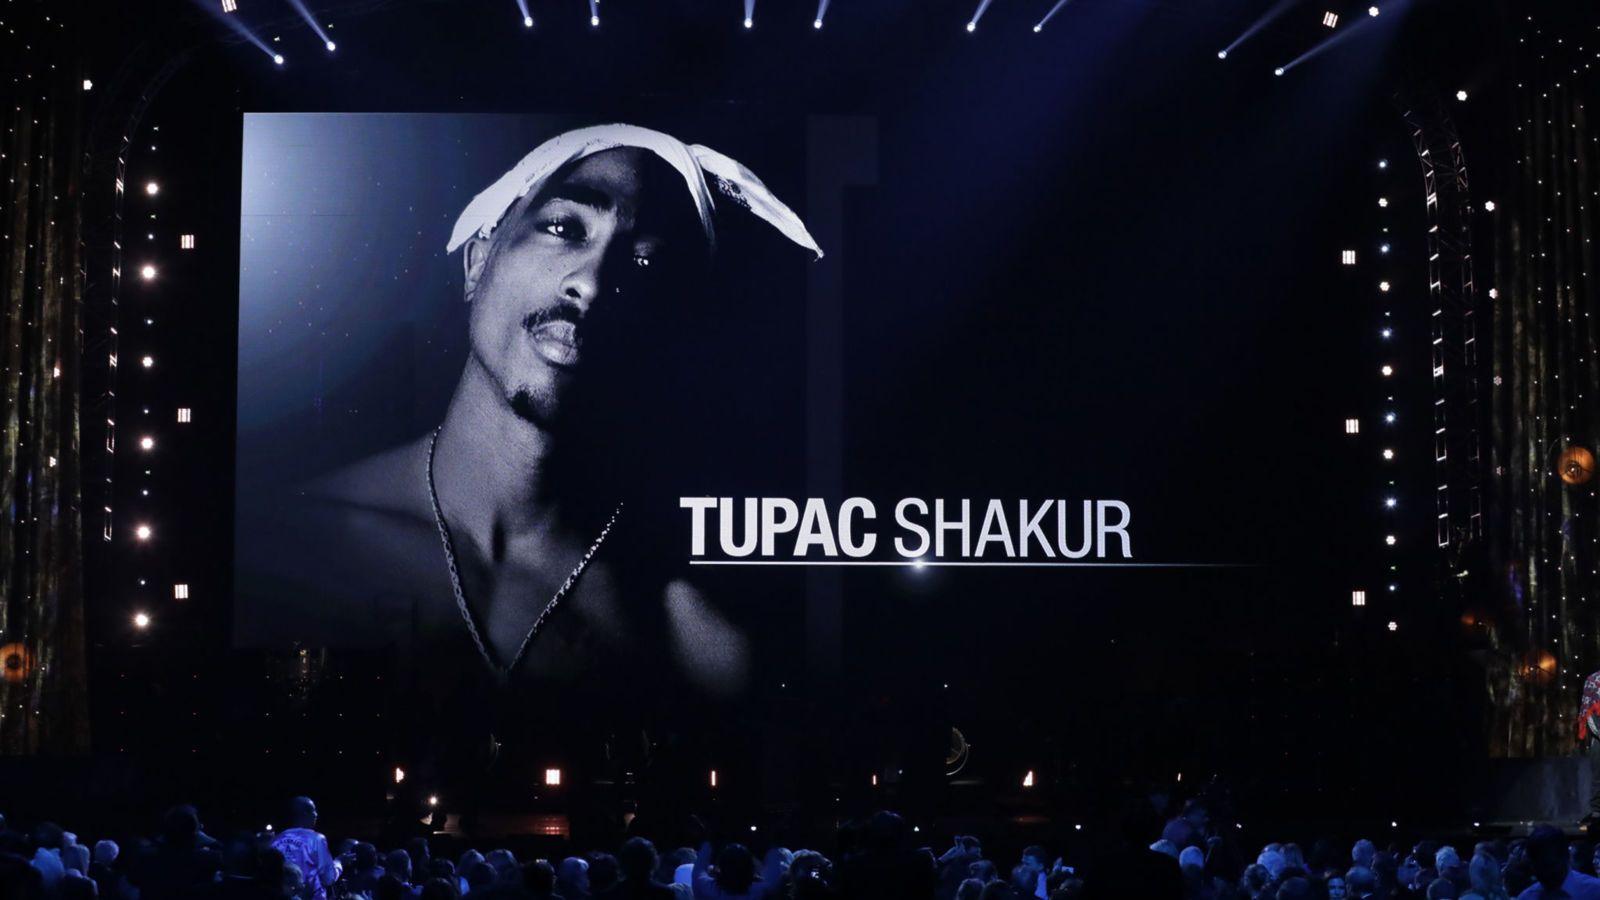 VIDEO TUPAC INDUCTED INTO ROCK AND ROLL HALL OF FAME